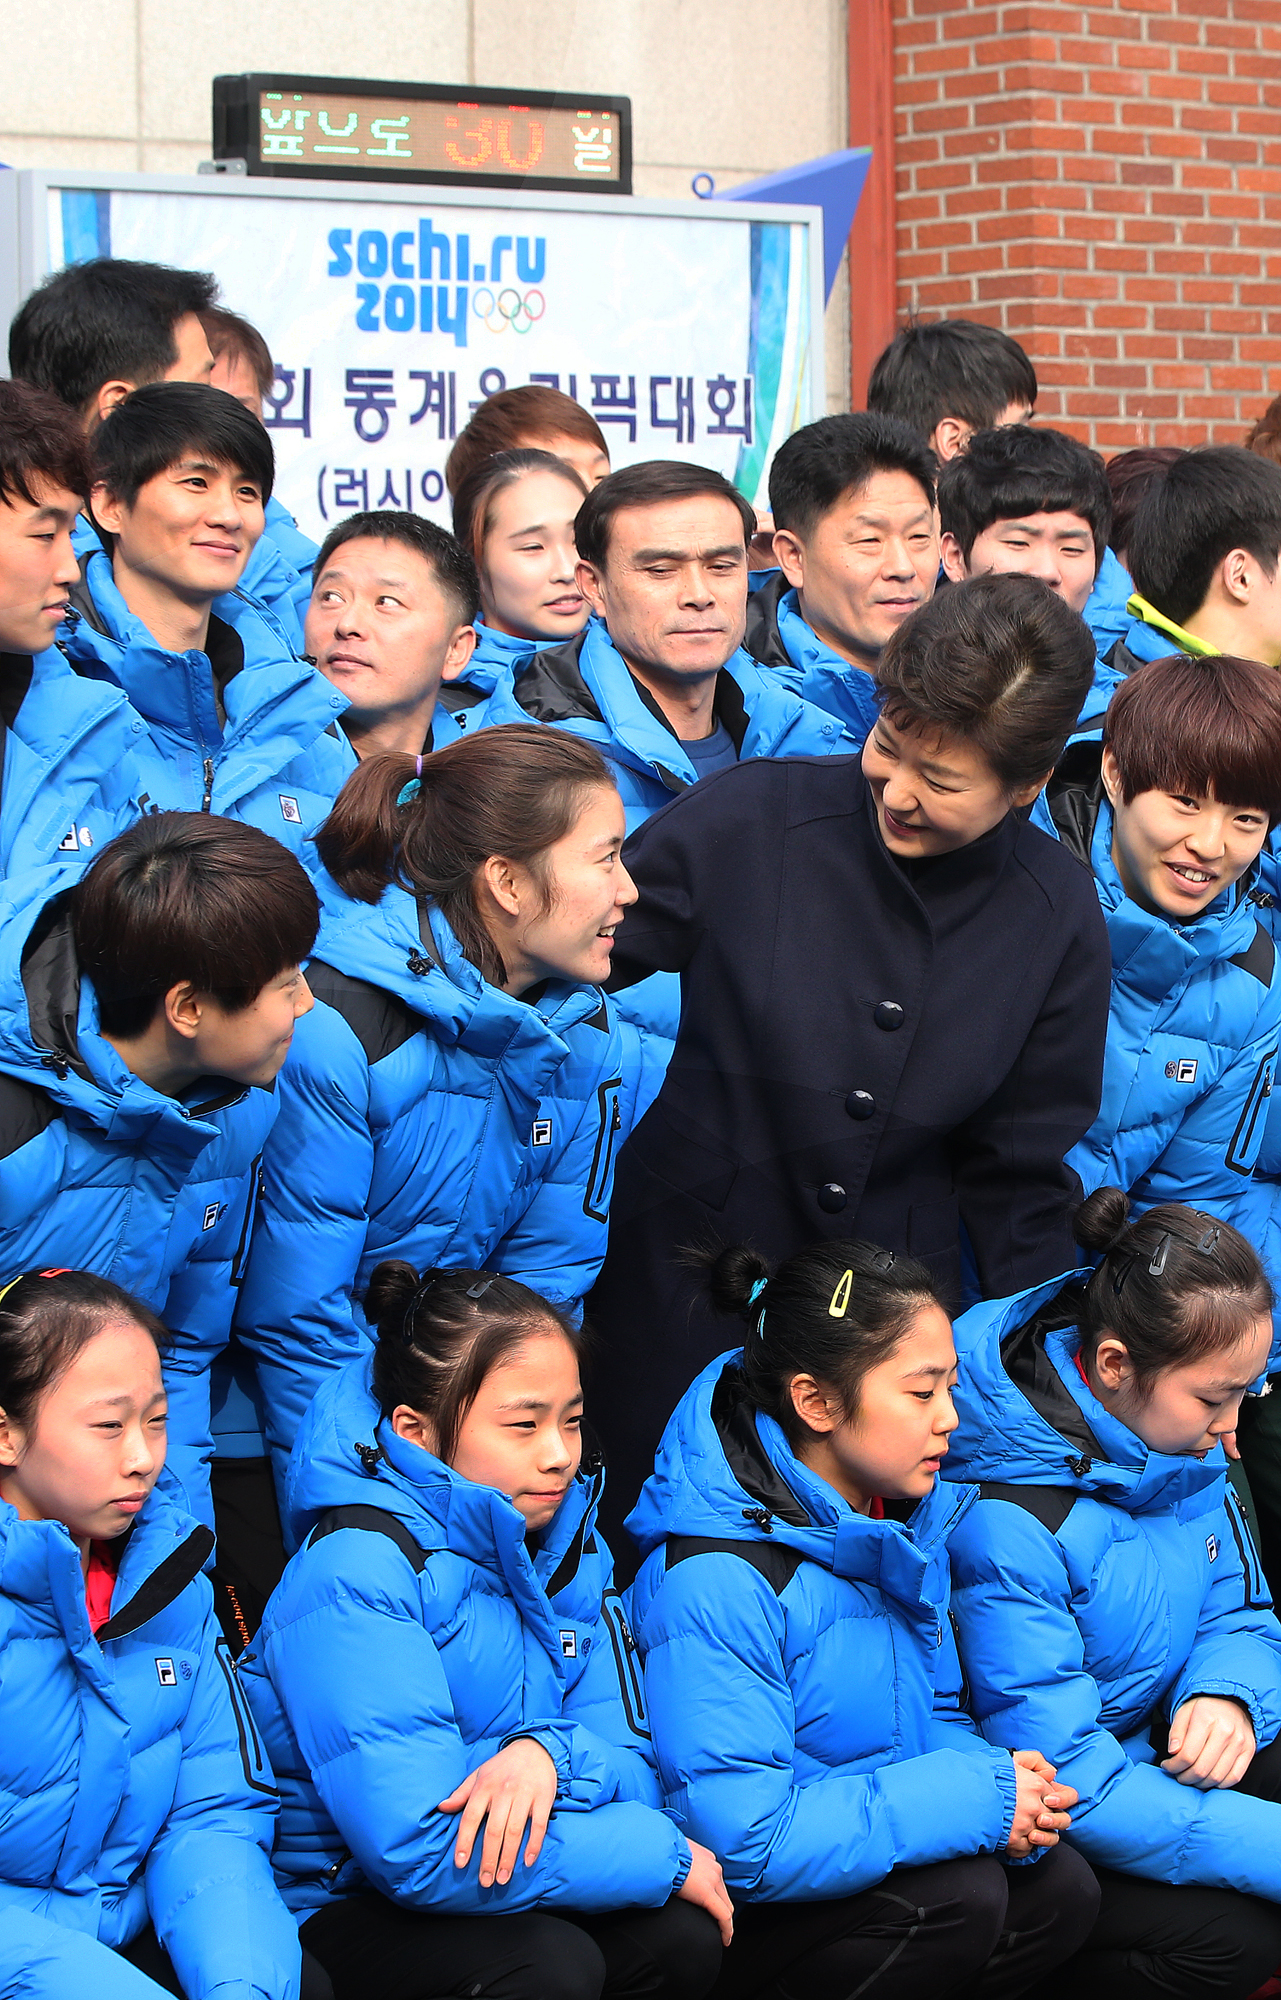 To mark the 30-day countdown, President Park Geun-hye visited the National Training Center on Wednesday to encourage the athletes. (Yonhap)